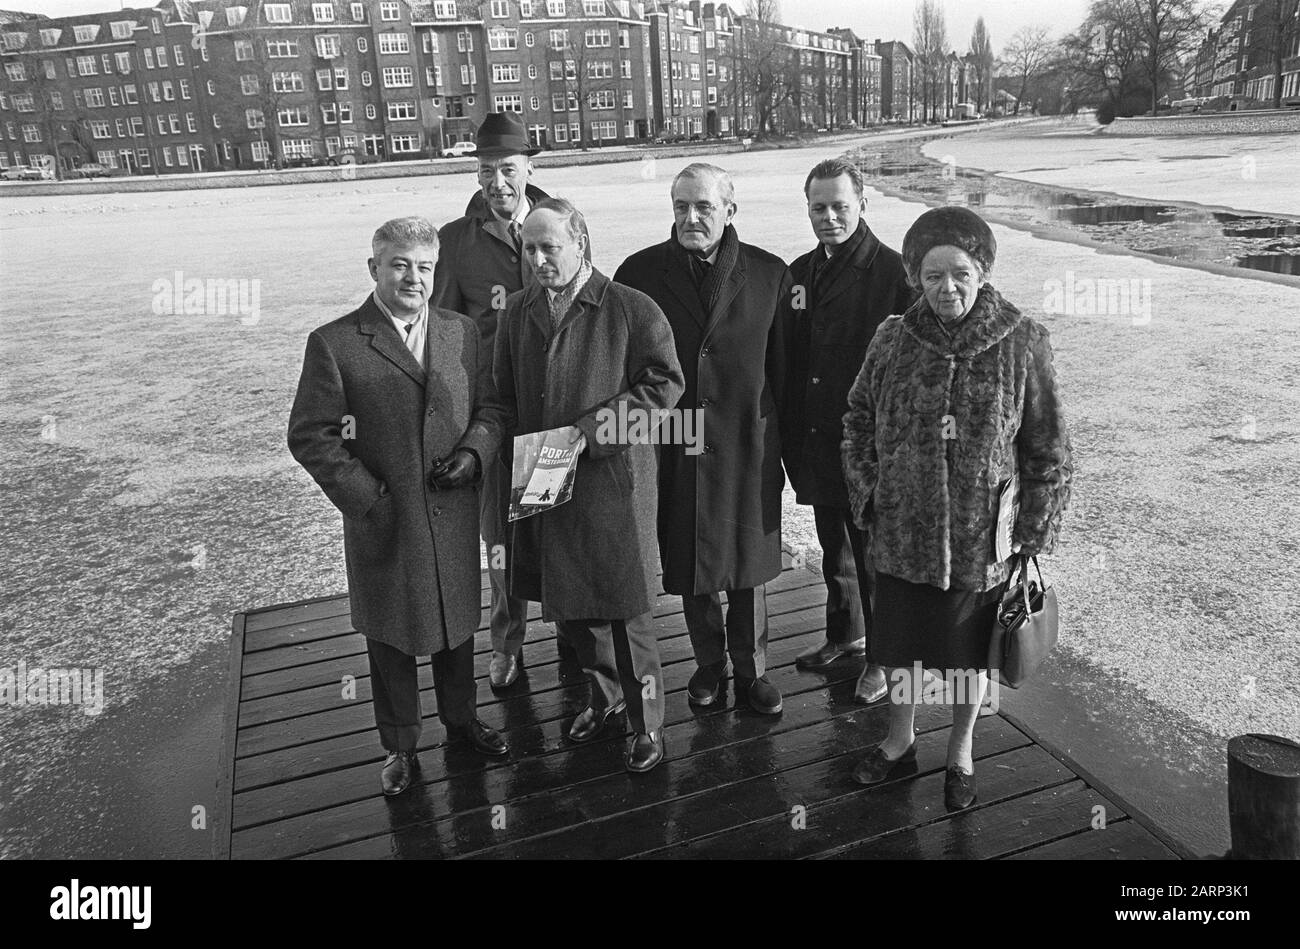 Jury for the competition of the City Hall of Amsterdam  V.L.N.R. architect Prof. H. Schader, architect Huig Maaskant, urban architect Chris Nielsen, J. Pedersen (City Architect Copenhagen), architect Frans van Gool and urban planner mej. Jacoba (Ko) Mulder Annotation: Schader correct name? Date: 13 January 1968 Location: Amsterdam, Noord-Holland Keywords: architects, juries, urban planners Personal name: Gool, Frans van, Maaskant, Huig, Mulder, Jacoba, Nielsen, Chris, Pedersen, J., Schader, H, Stock Photo